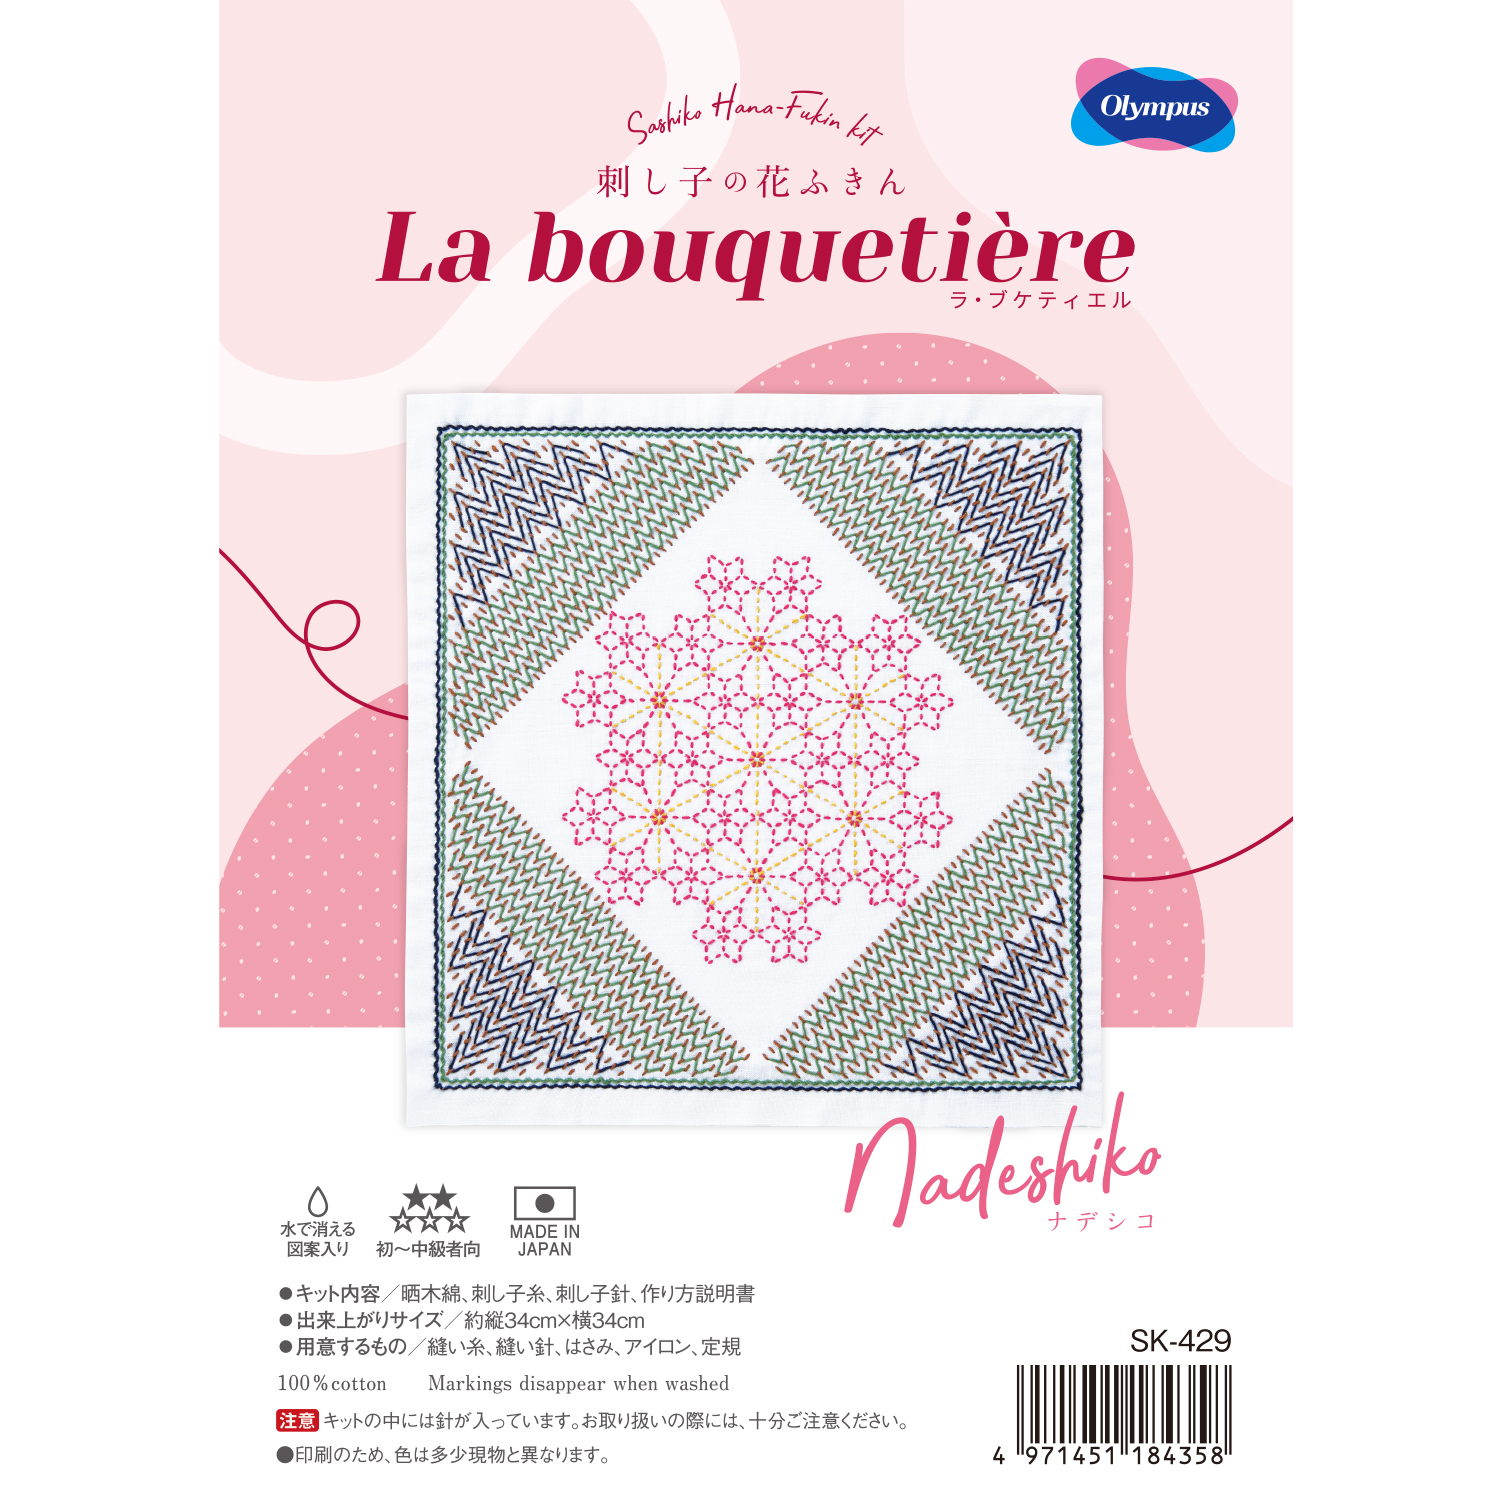 SK-432  La bouquetiere Drop  全商品オープニング価格 オリムパス 刺し子の花ふきんキット